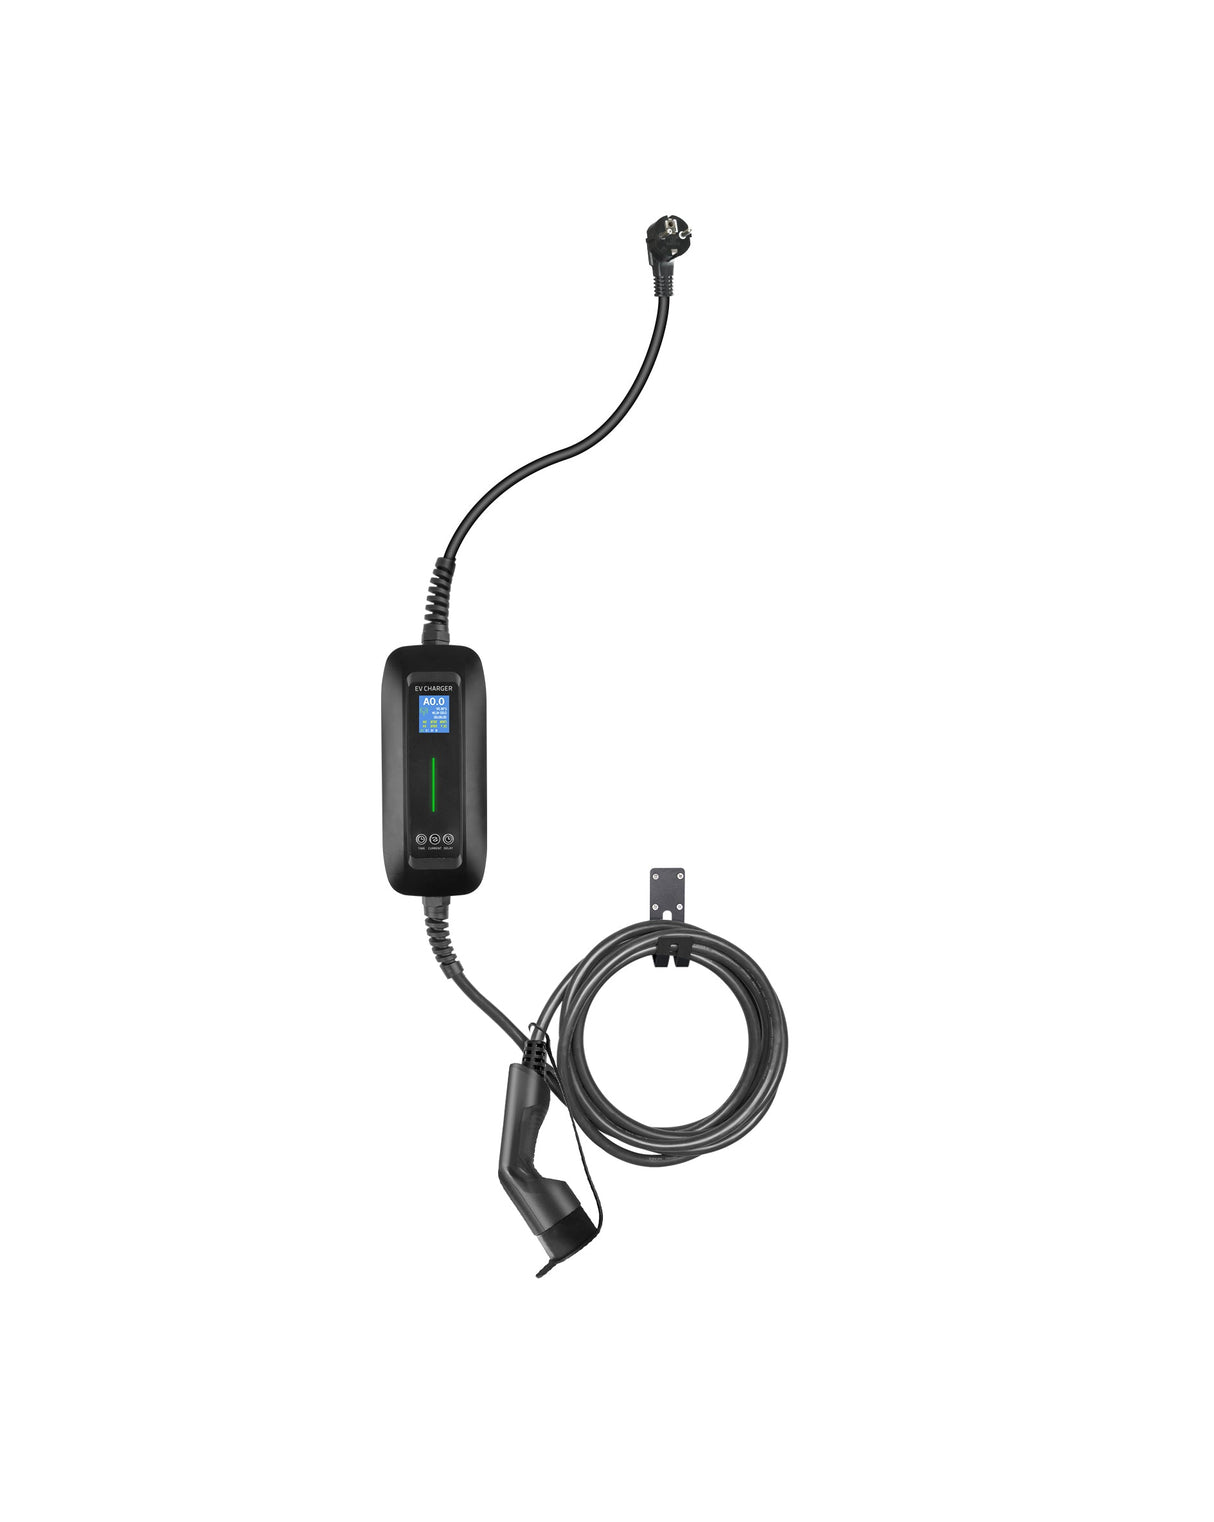 Mobile Charger Renault Kangoo - LCD Black Type 2 to Schuko - Delayed charging and Memory function